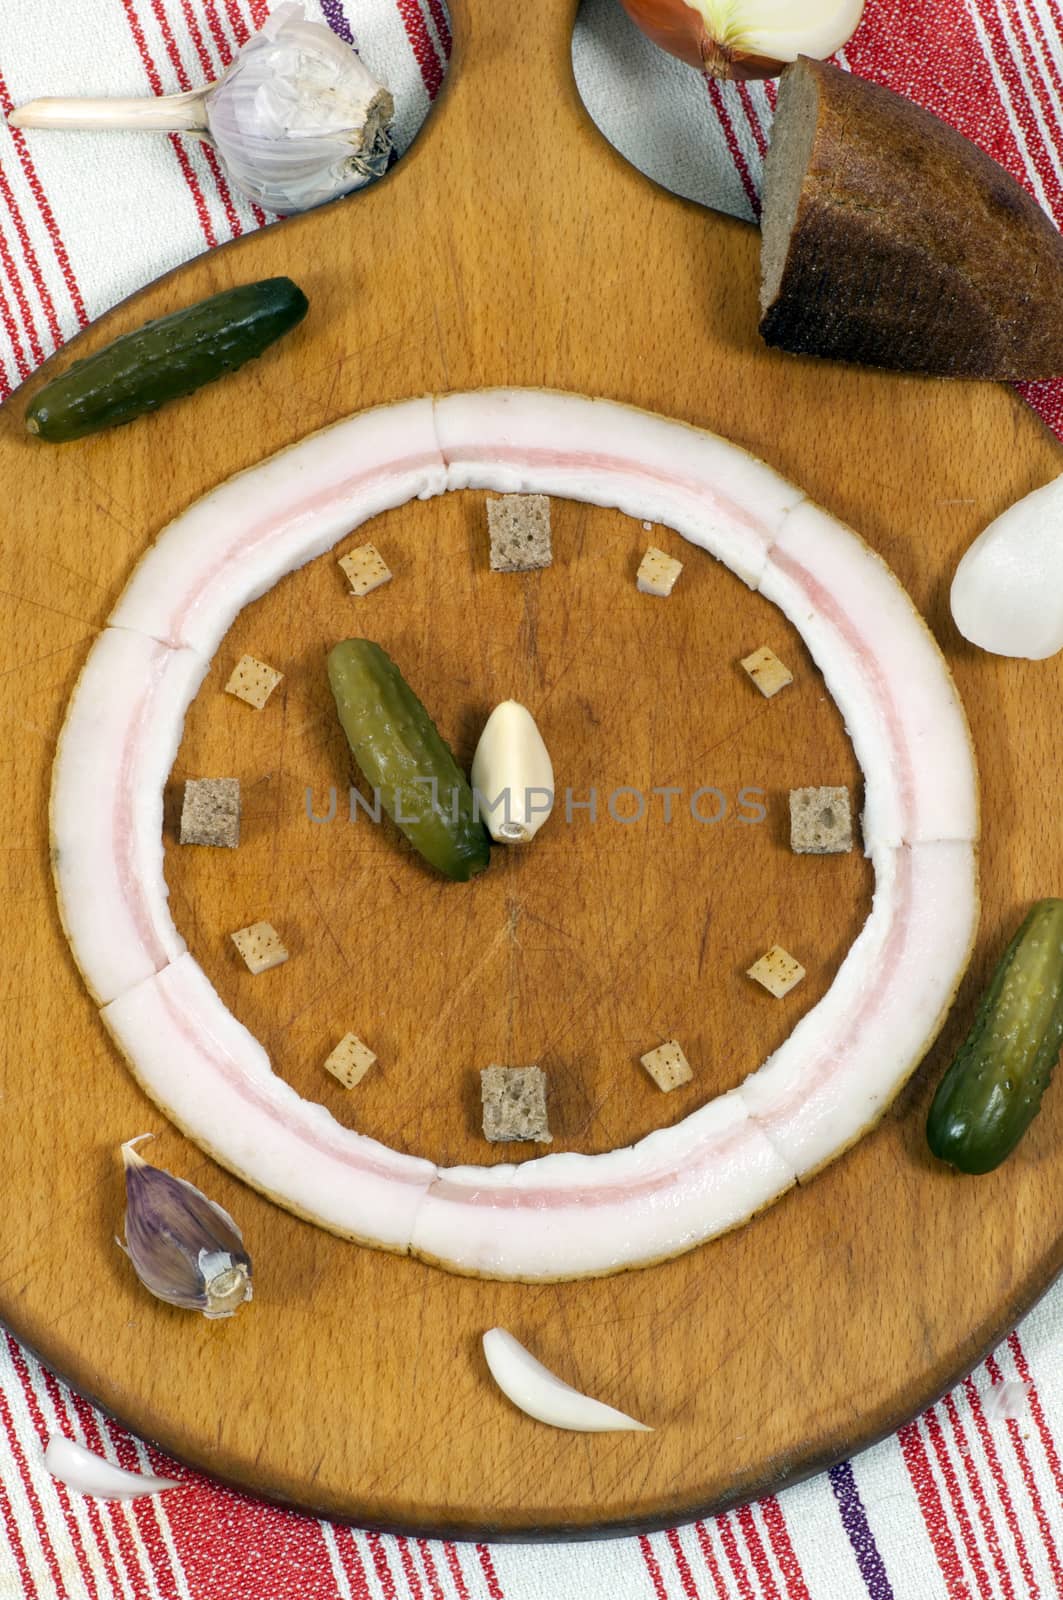 Clock made of food by dred